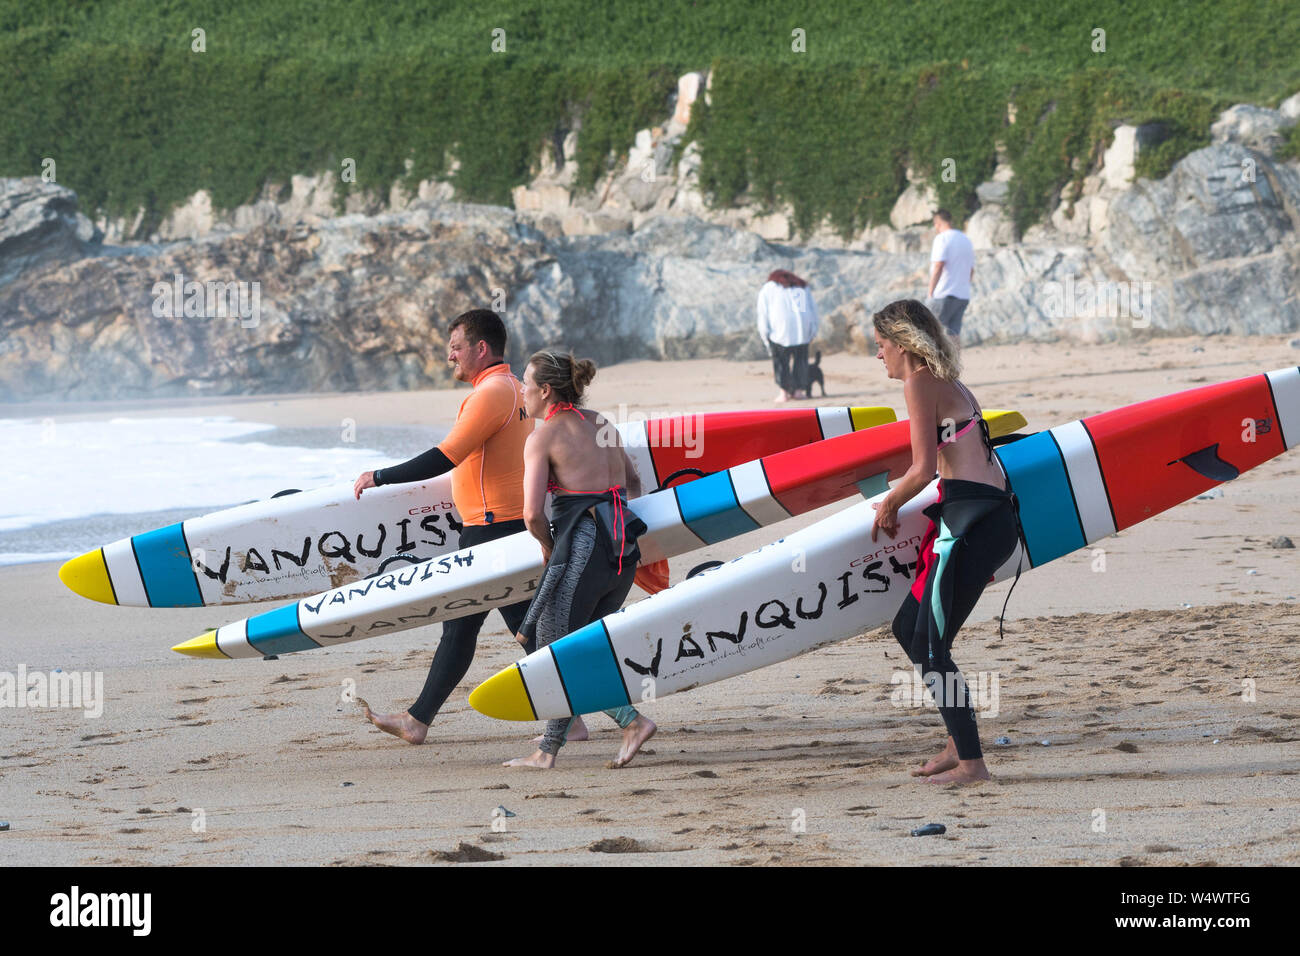 Members of Newquay Surf Life Saving Club carrying Vanquish Life Saving Race Boards starting a training session at Fistral in Newquay in Cornwall. Stock Photo